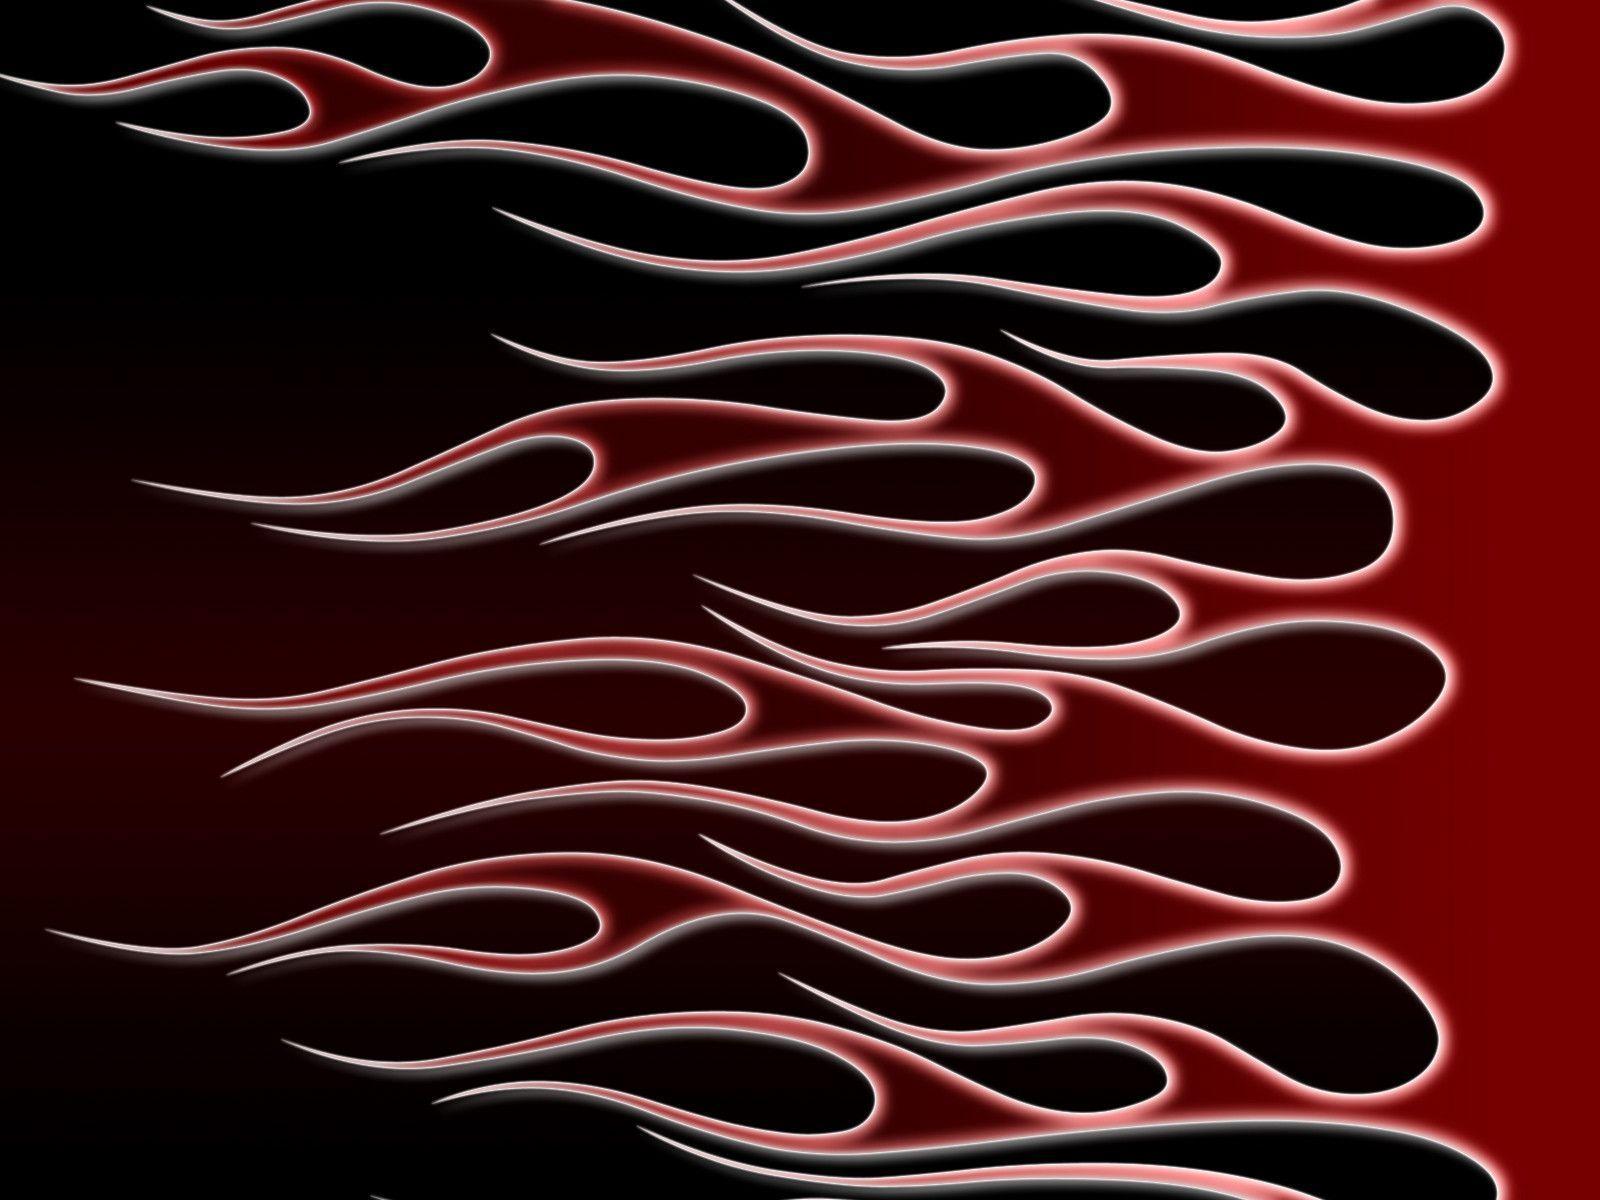 A red and black flame pattern on the wall - Flames